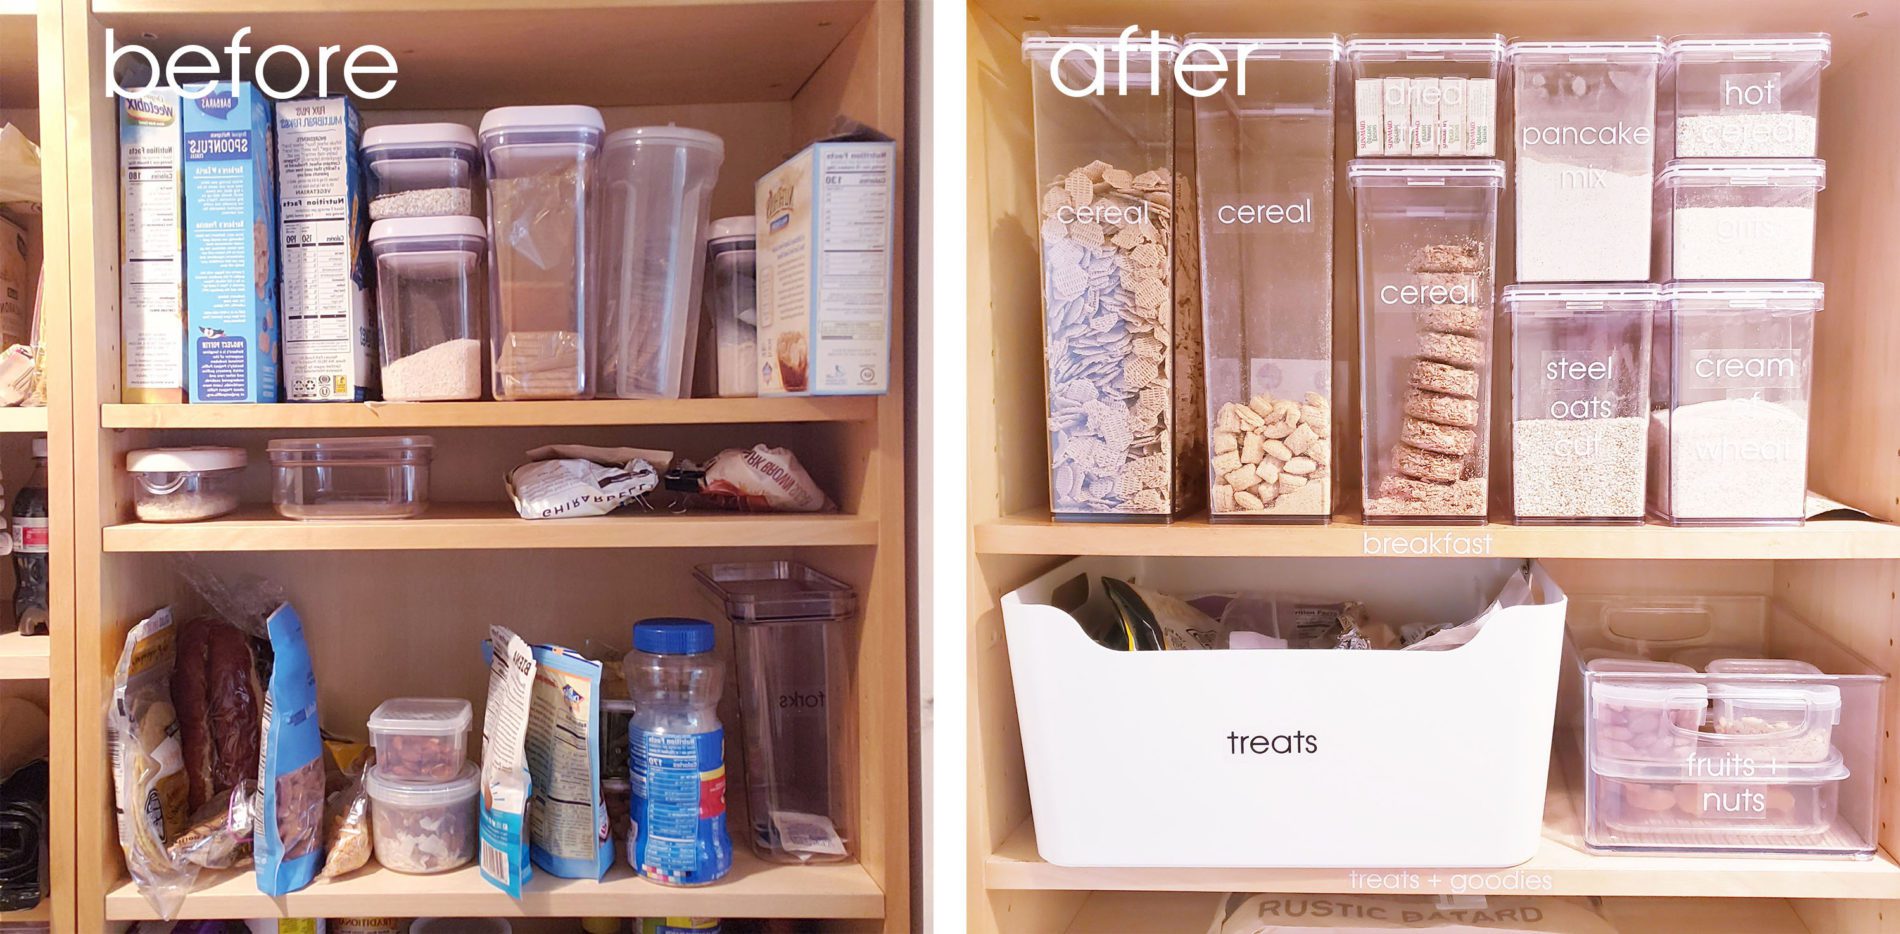 Before and after makeover of a kitchen pantry.